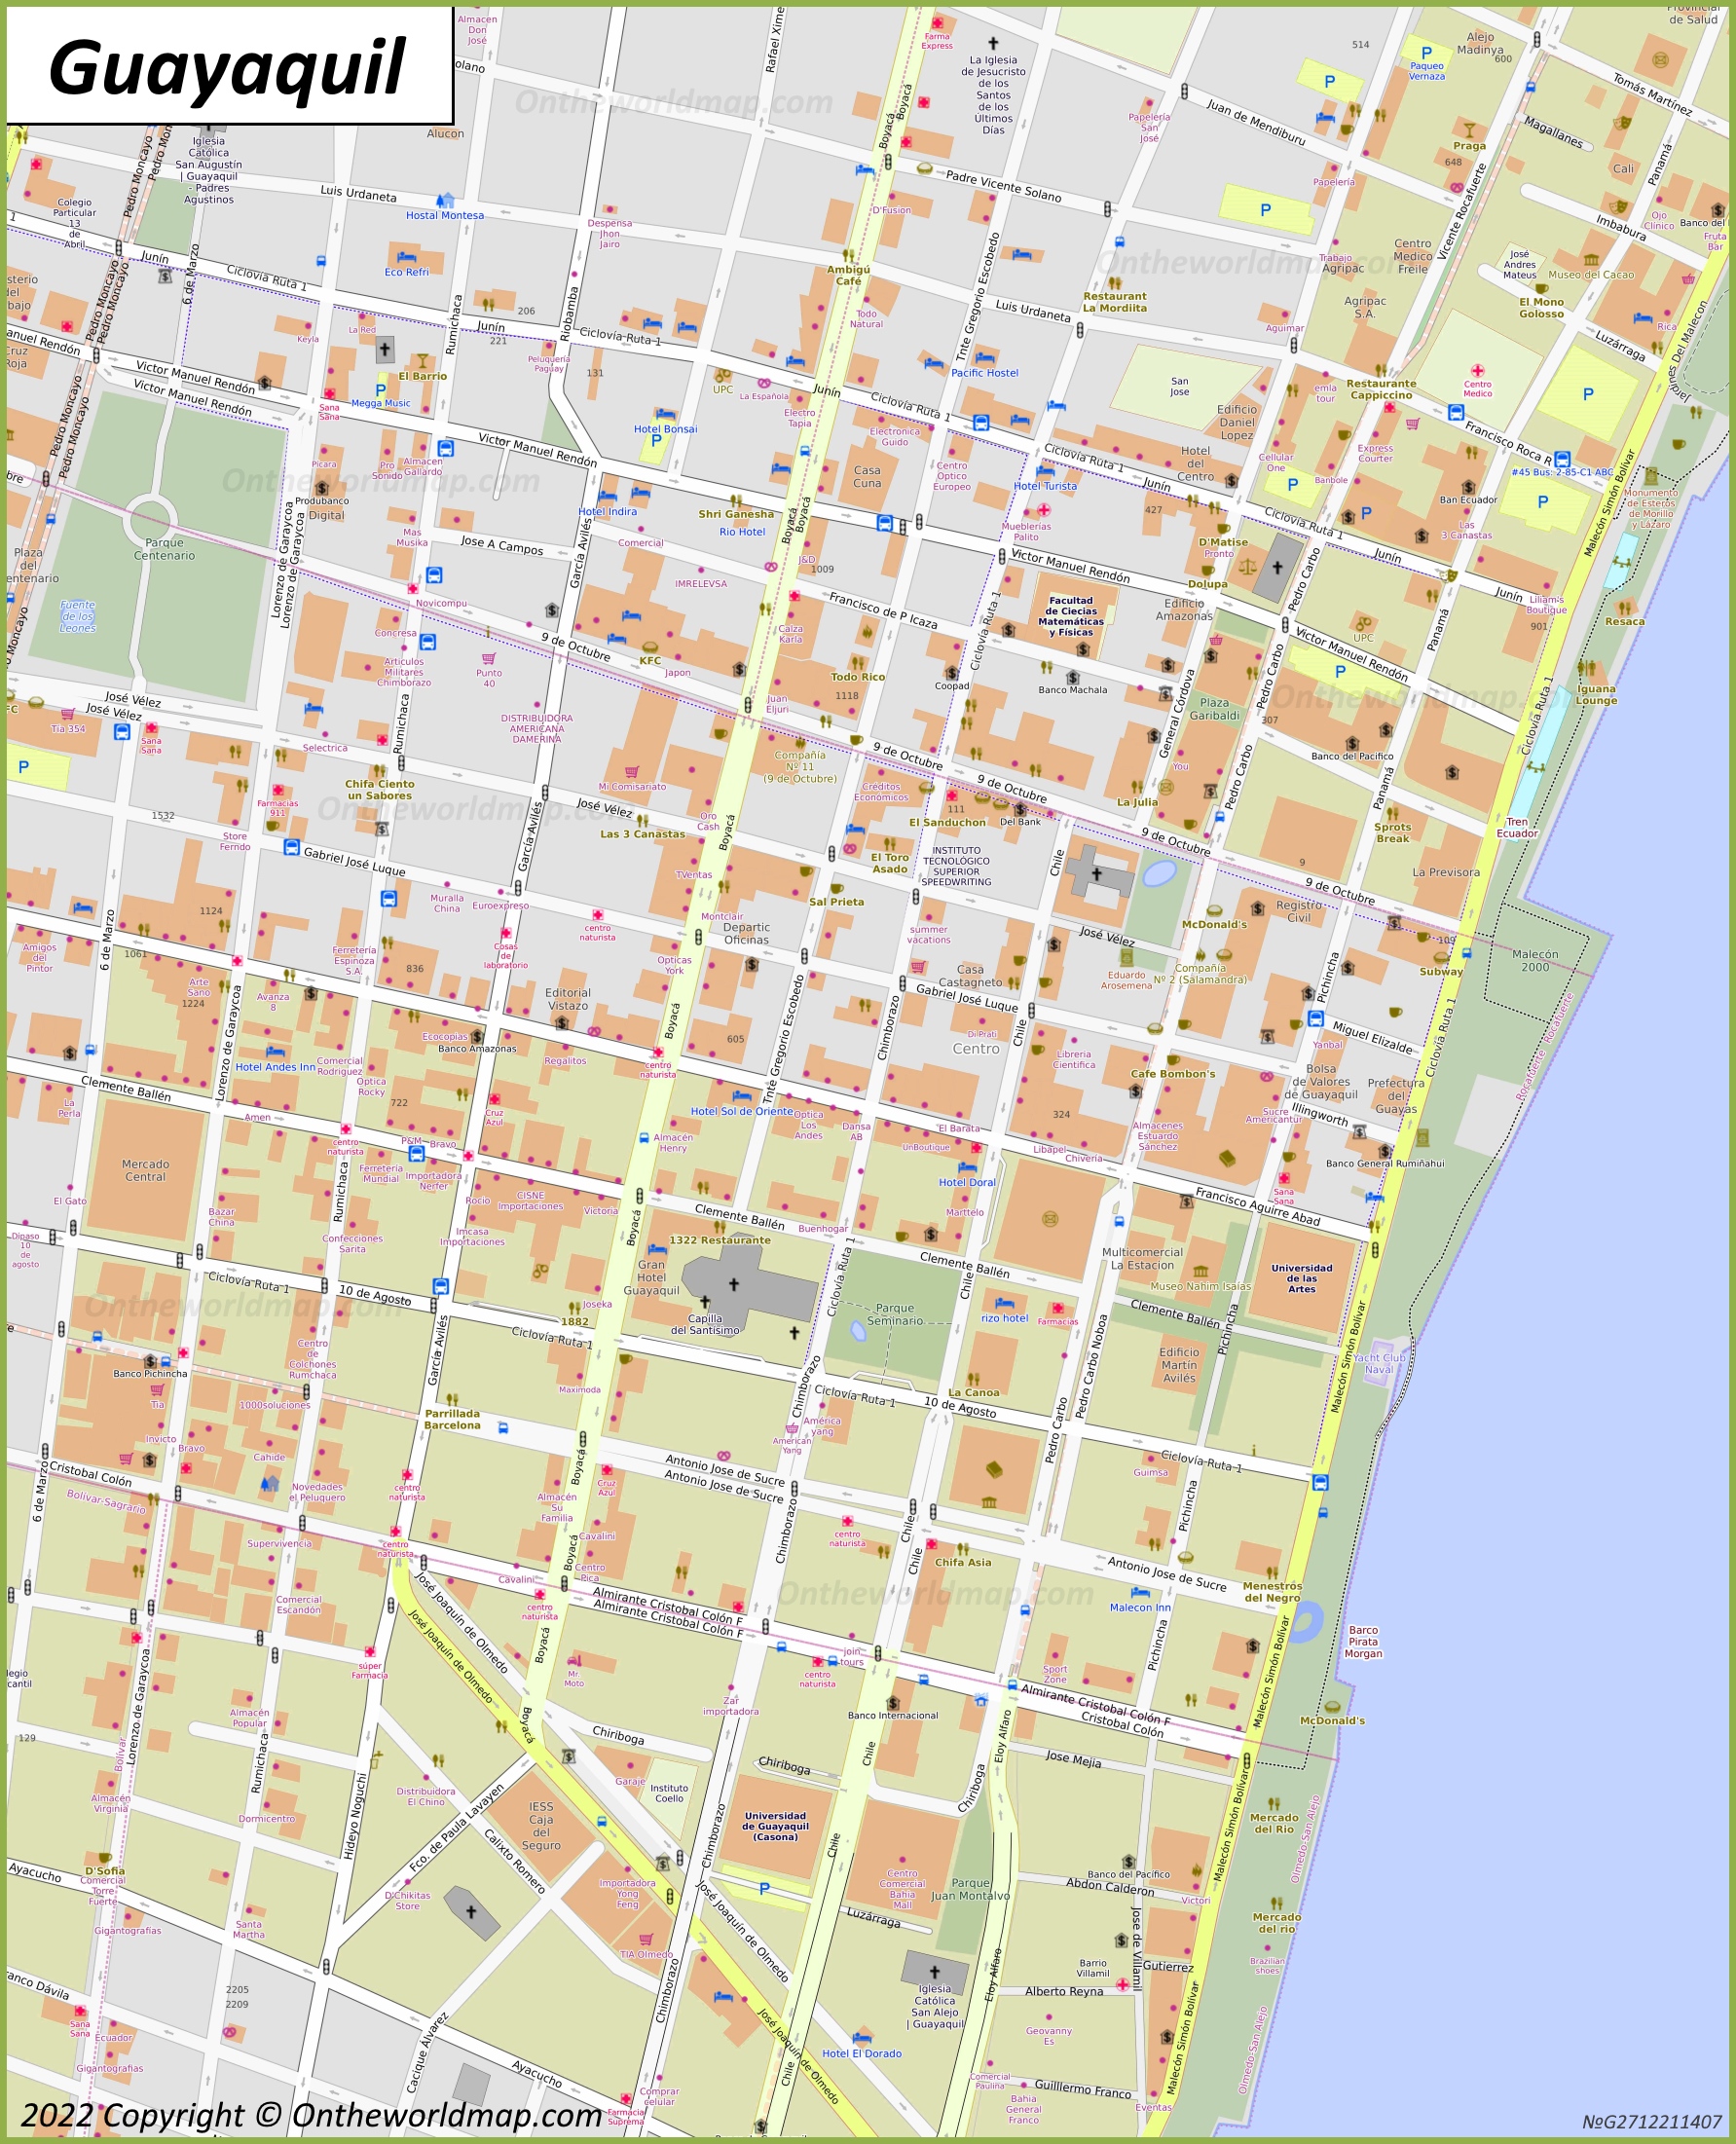 Guayaquil City Centre Map